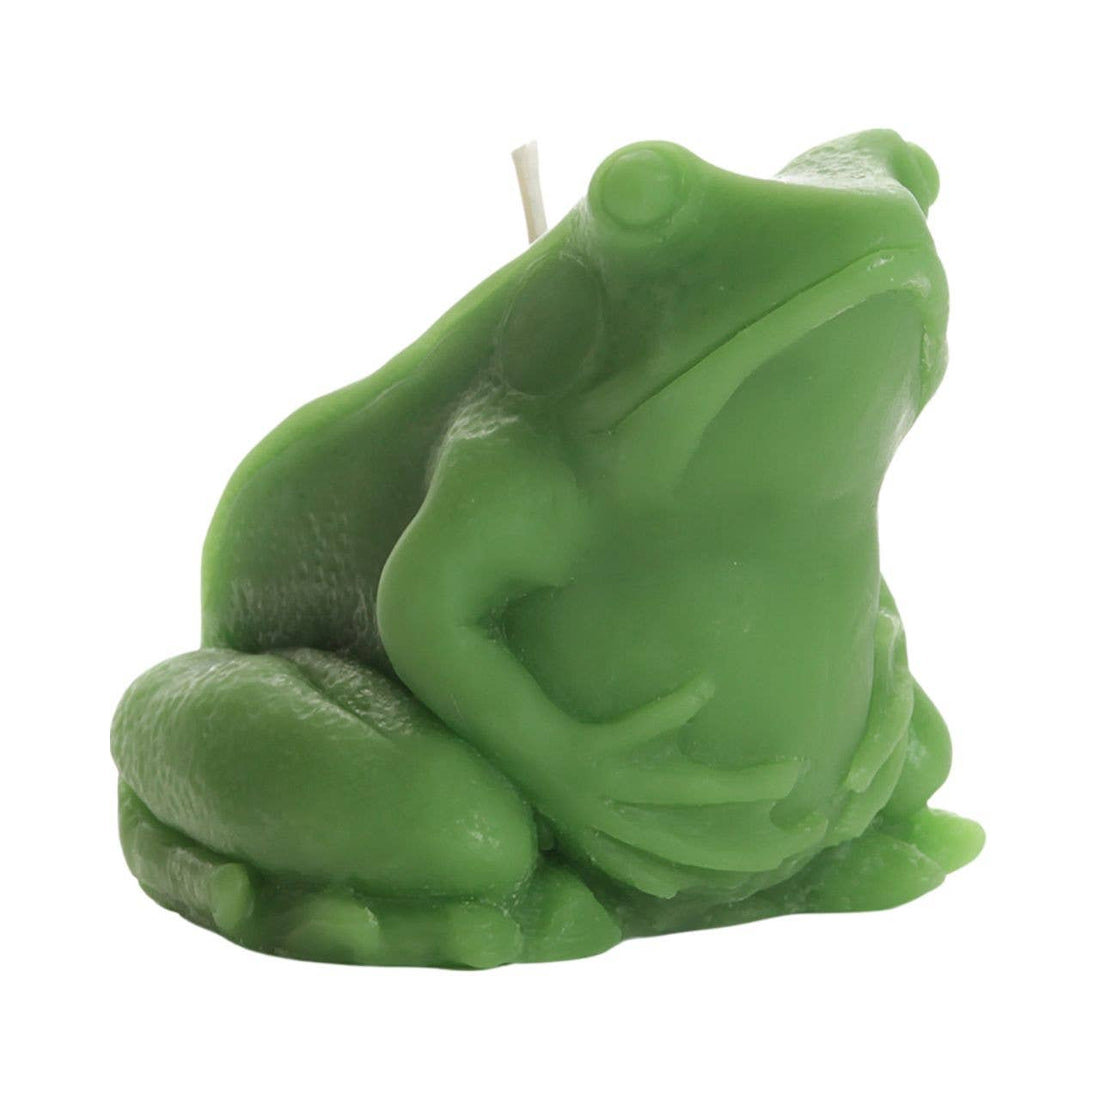 A medium green beeswax candle in the shape of a realistic frog holding its belly.